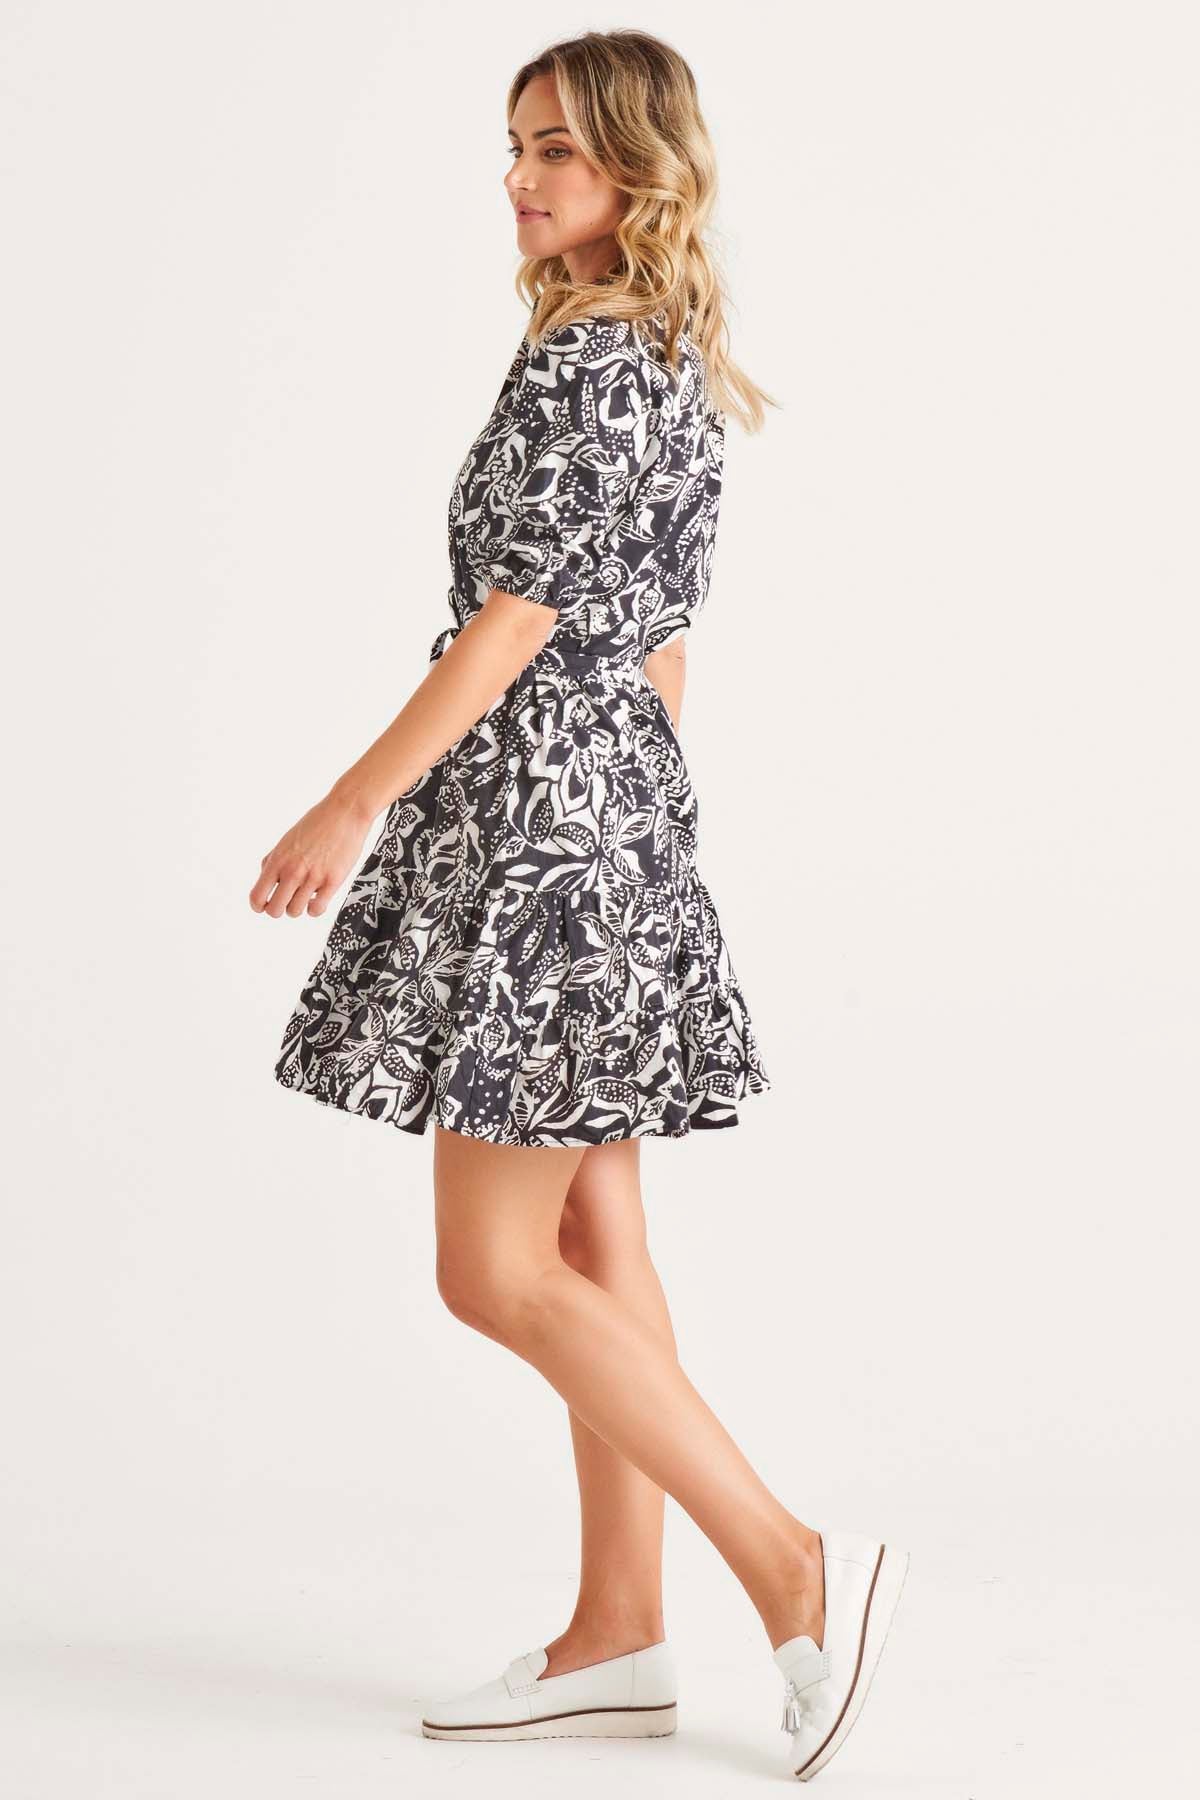 Betty Basics Marnie Dress in Floral Mono